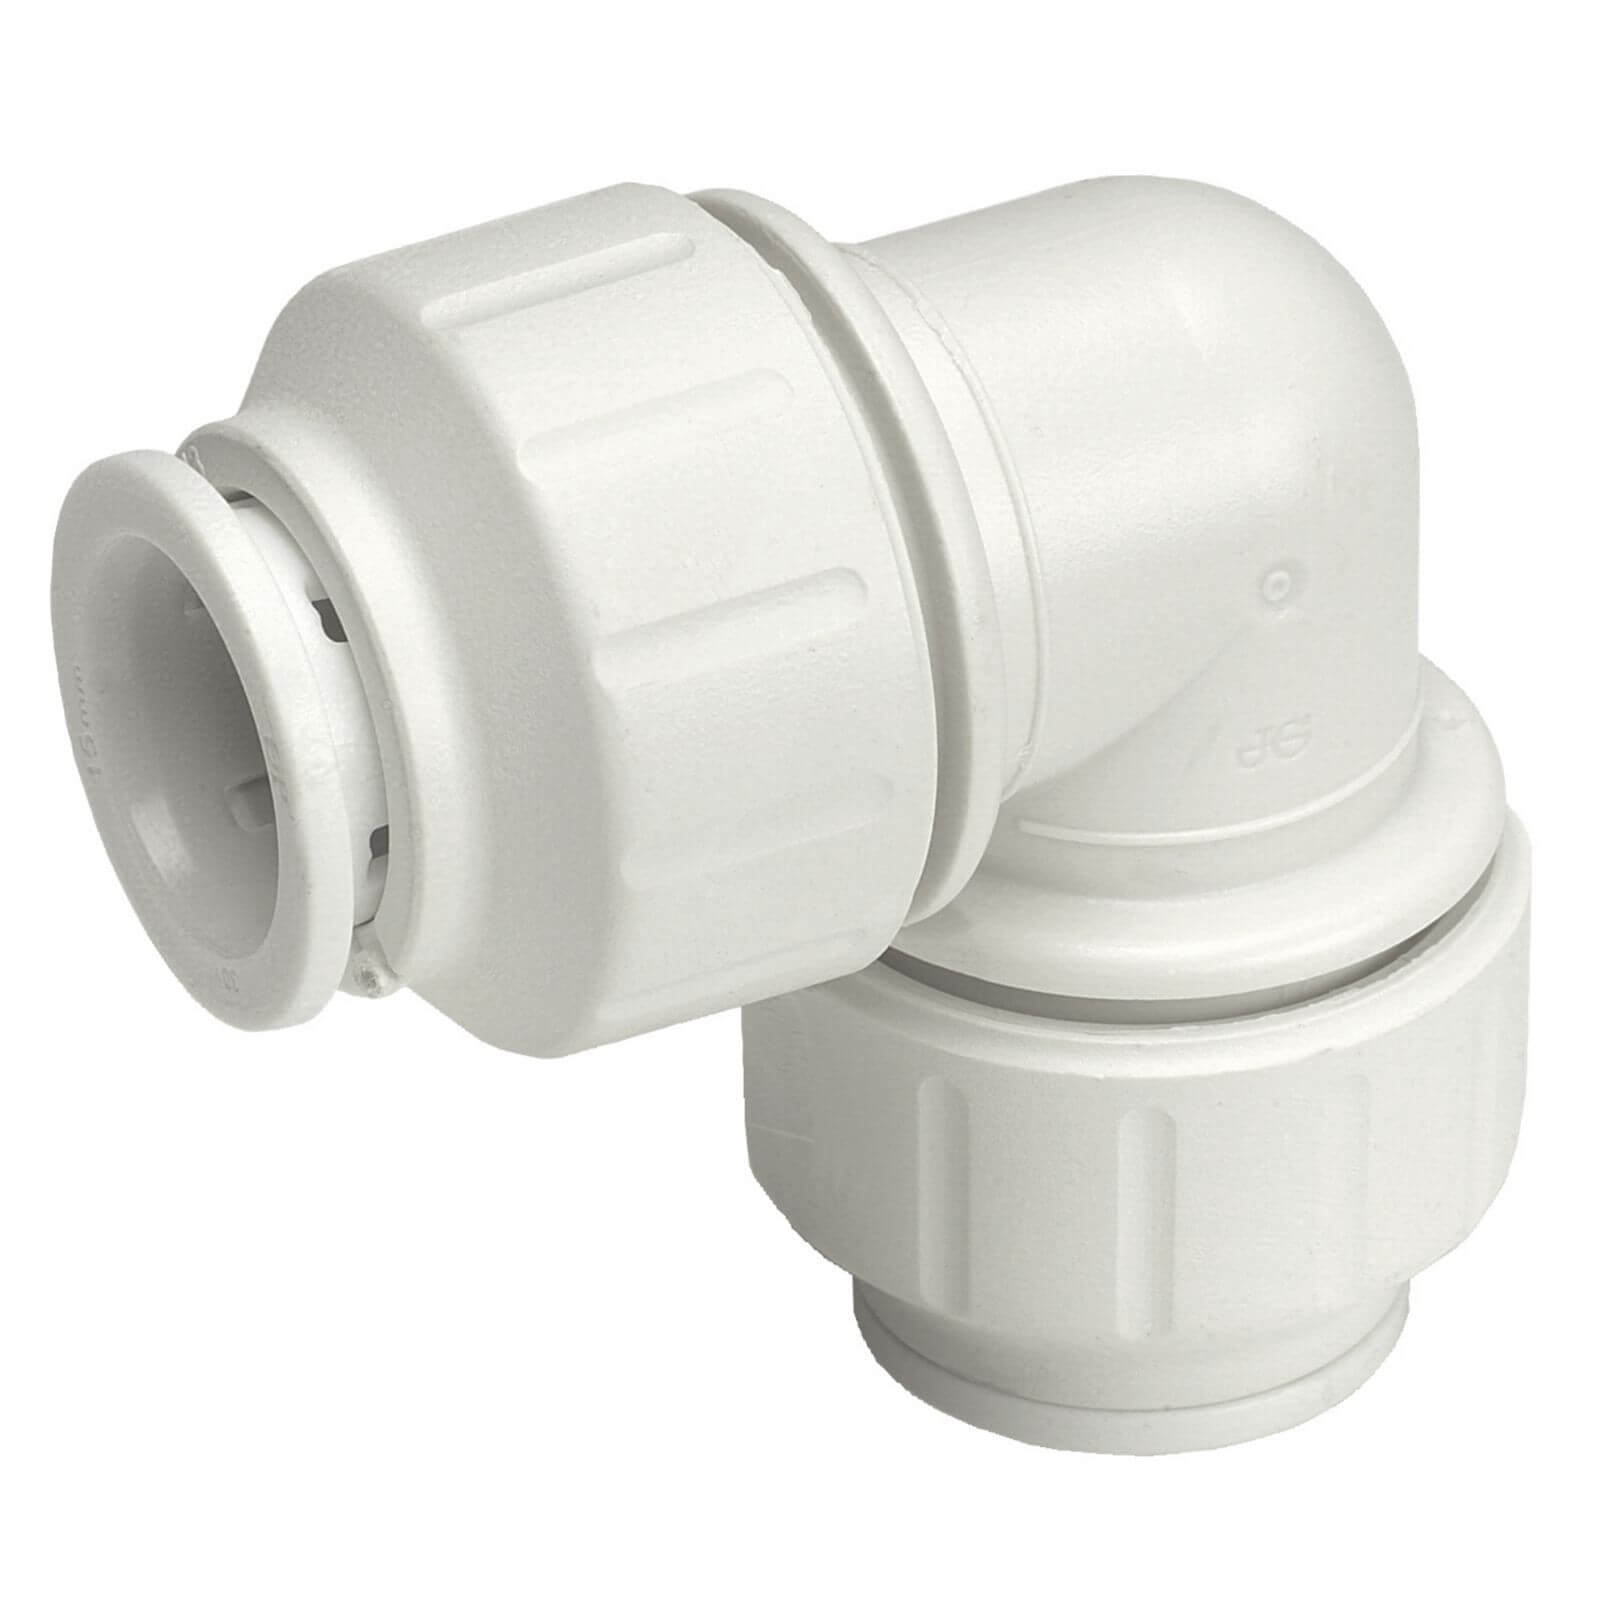 Photo of Jg Speedfit Elbow Connector - 22mm - 5 Pack